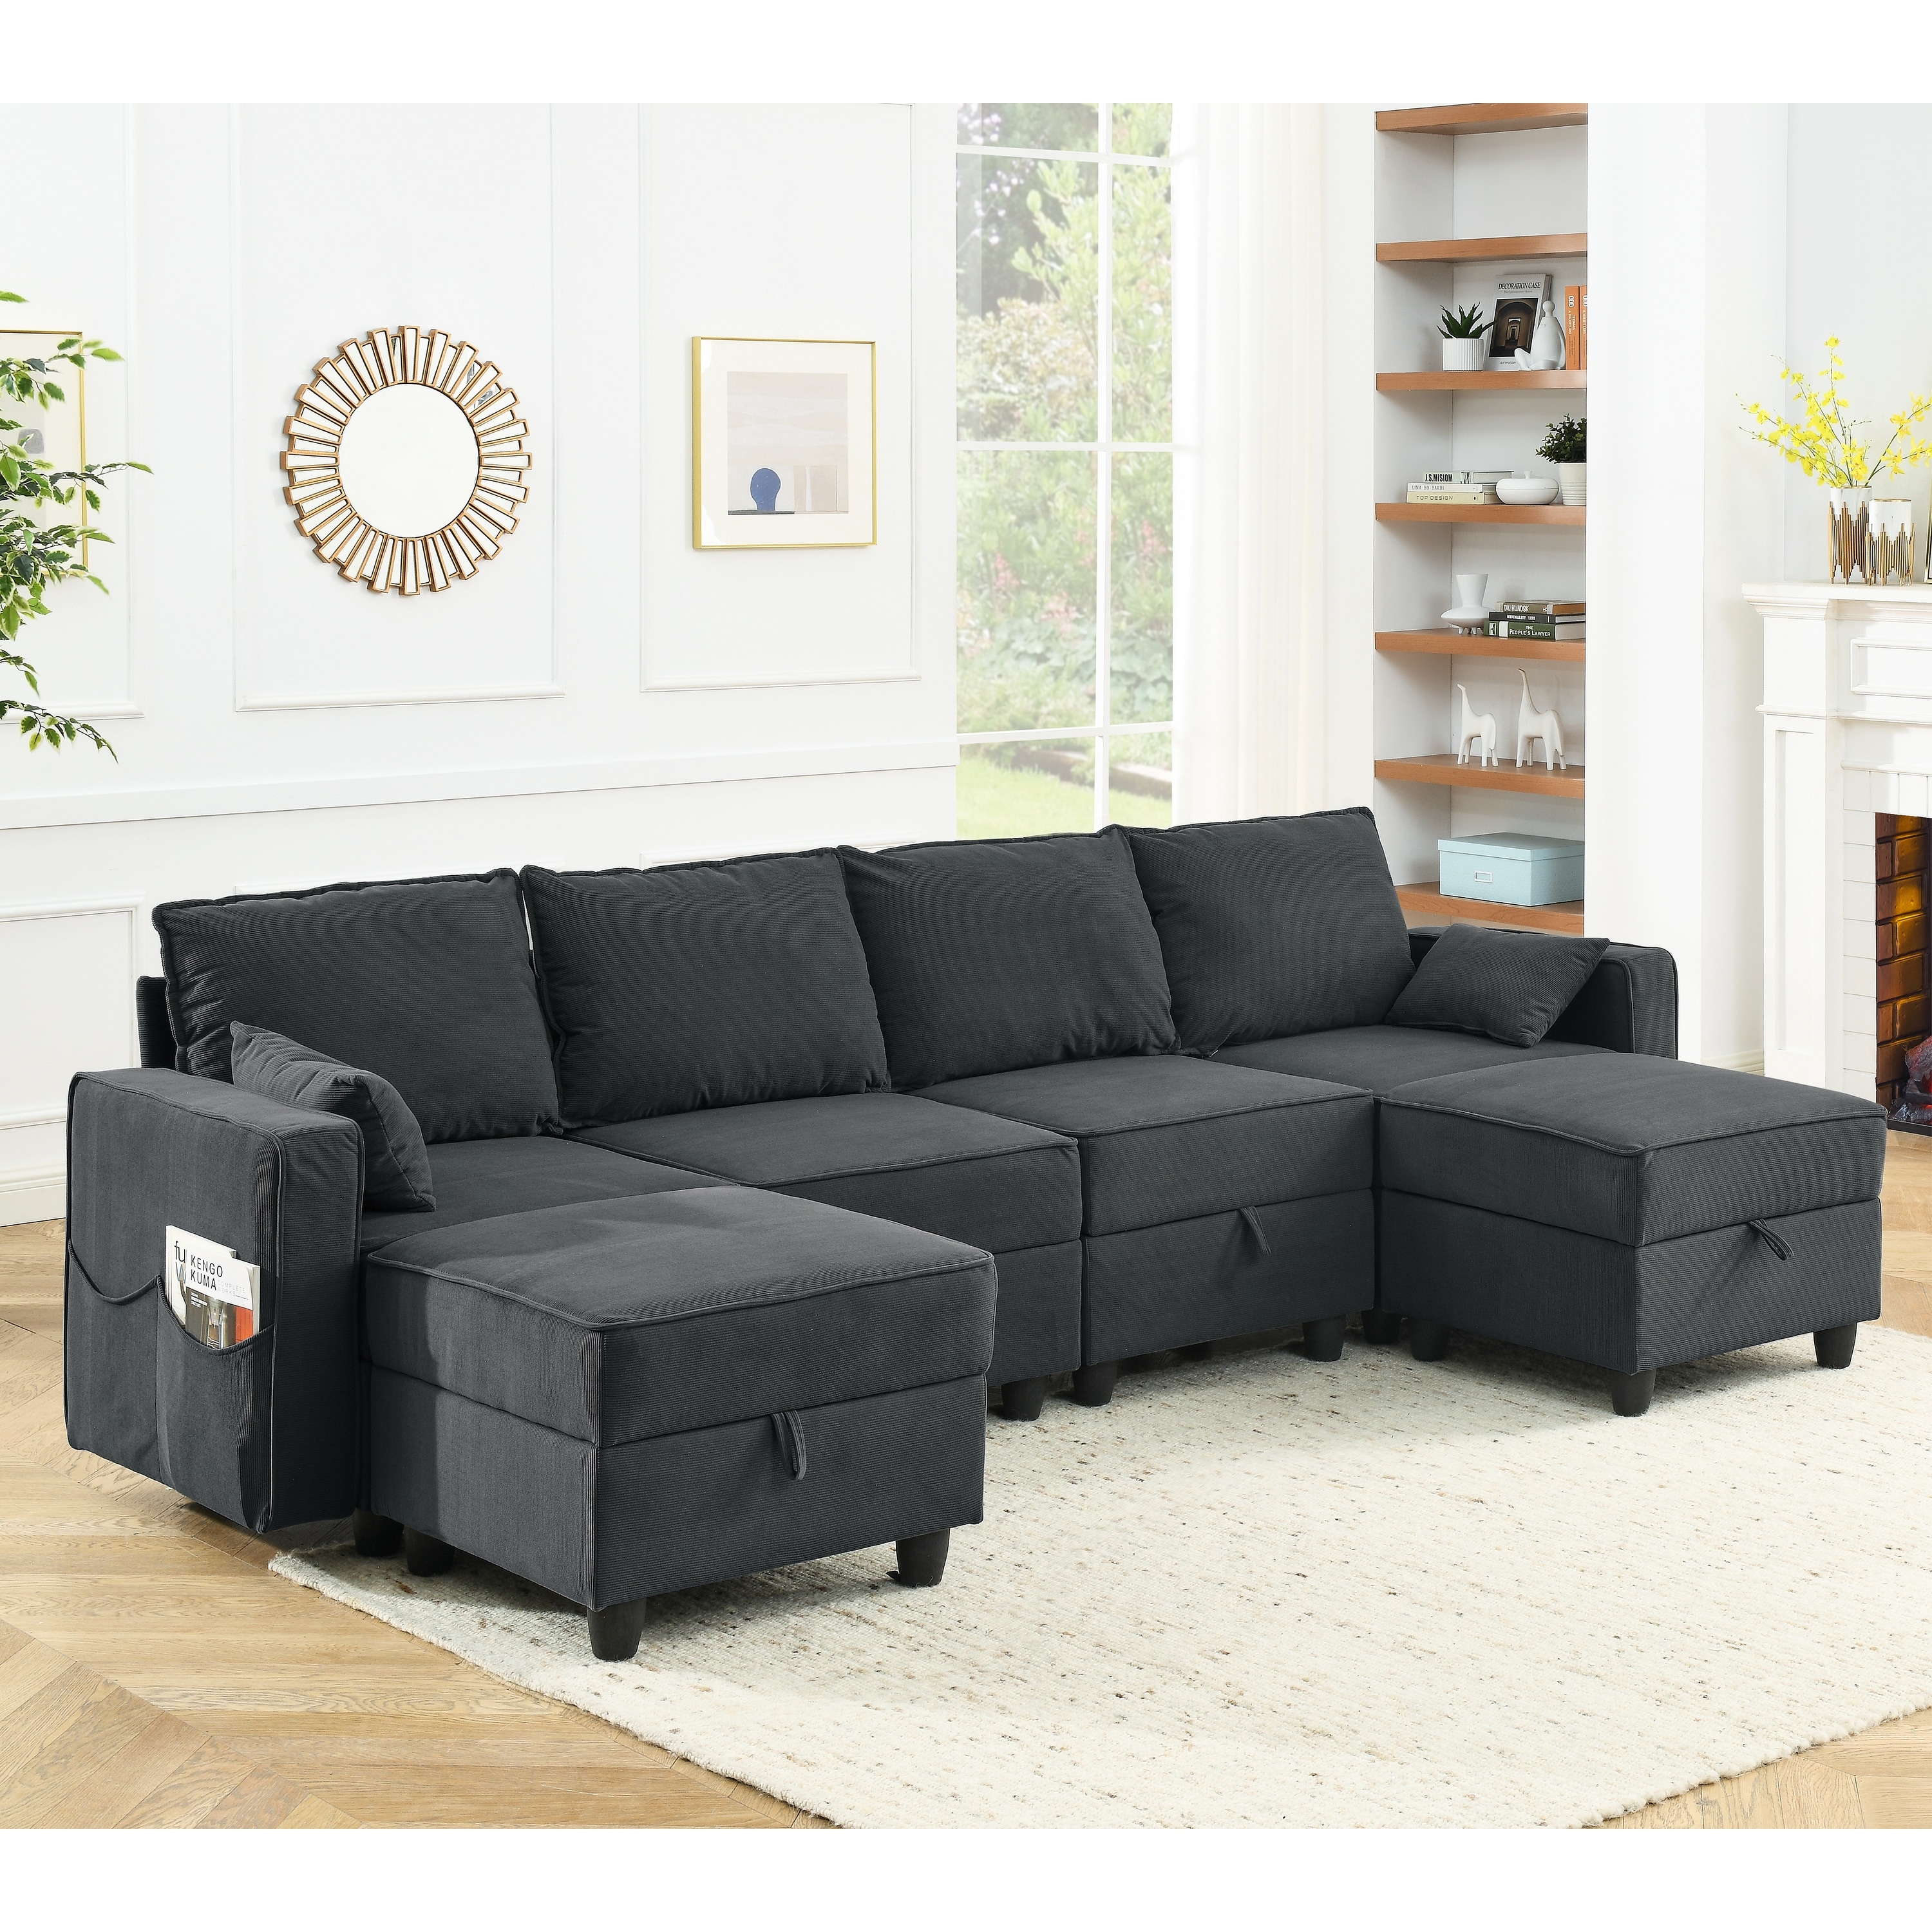 Corduroy Velvet Modular Sectional Sofa Couch  6 Storage Seat Convertible Sofa Bed Set For Living Room